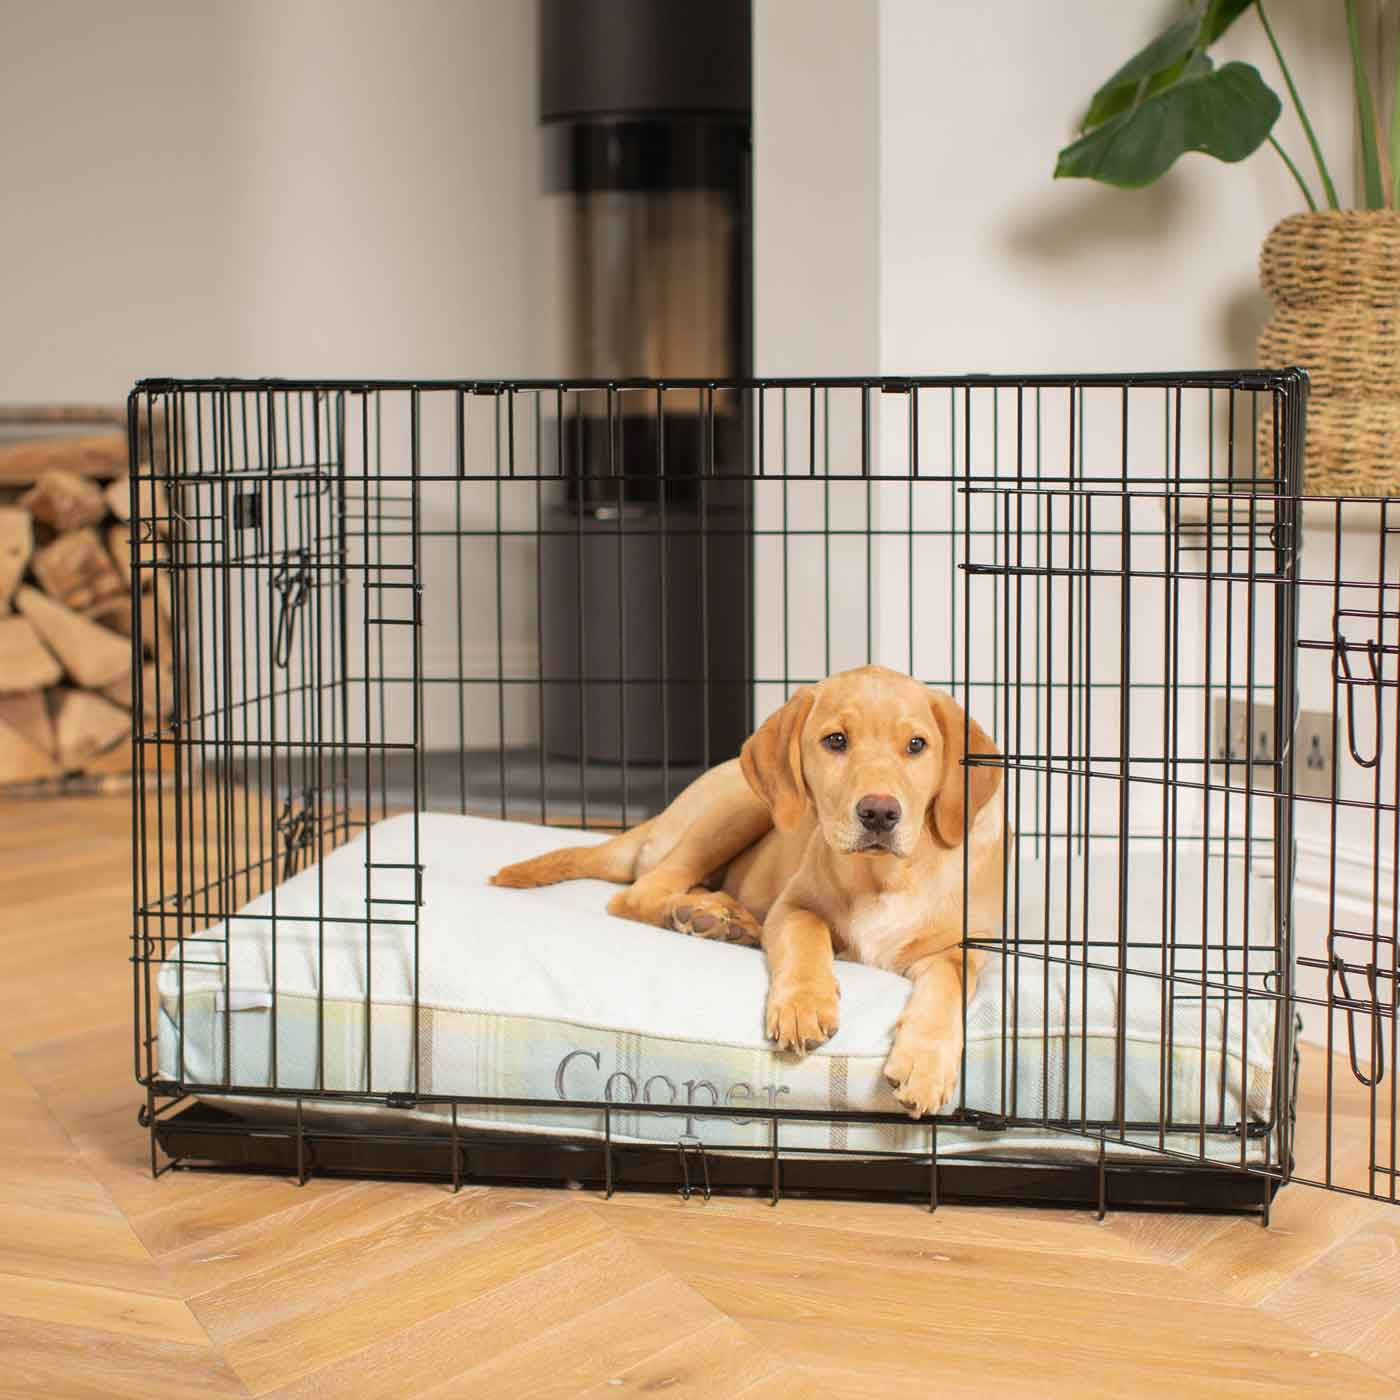 Luxury Dog Crate Cushion, Balmoral Duck Egg Tweed Crate Cushion The Perfect Dog Crate Accessory, Available To Personalise Now at Lords & Labradors